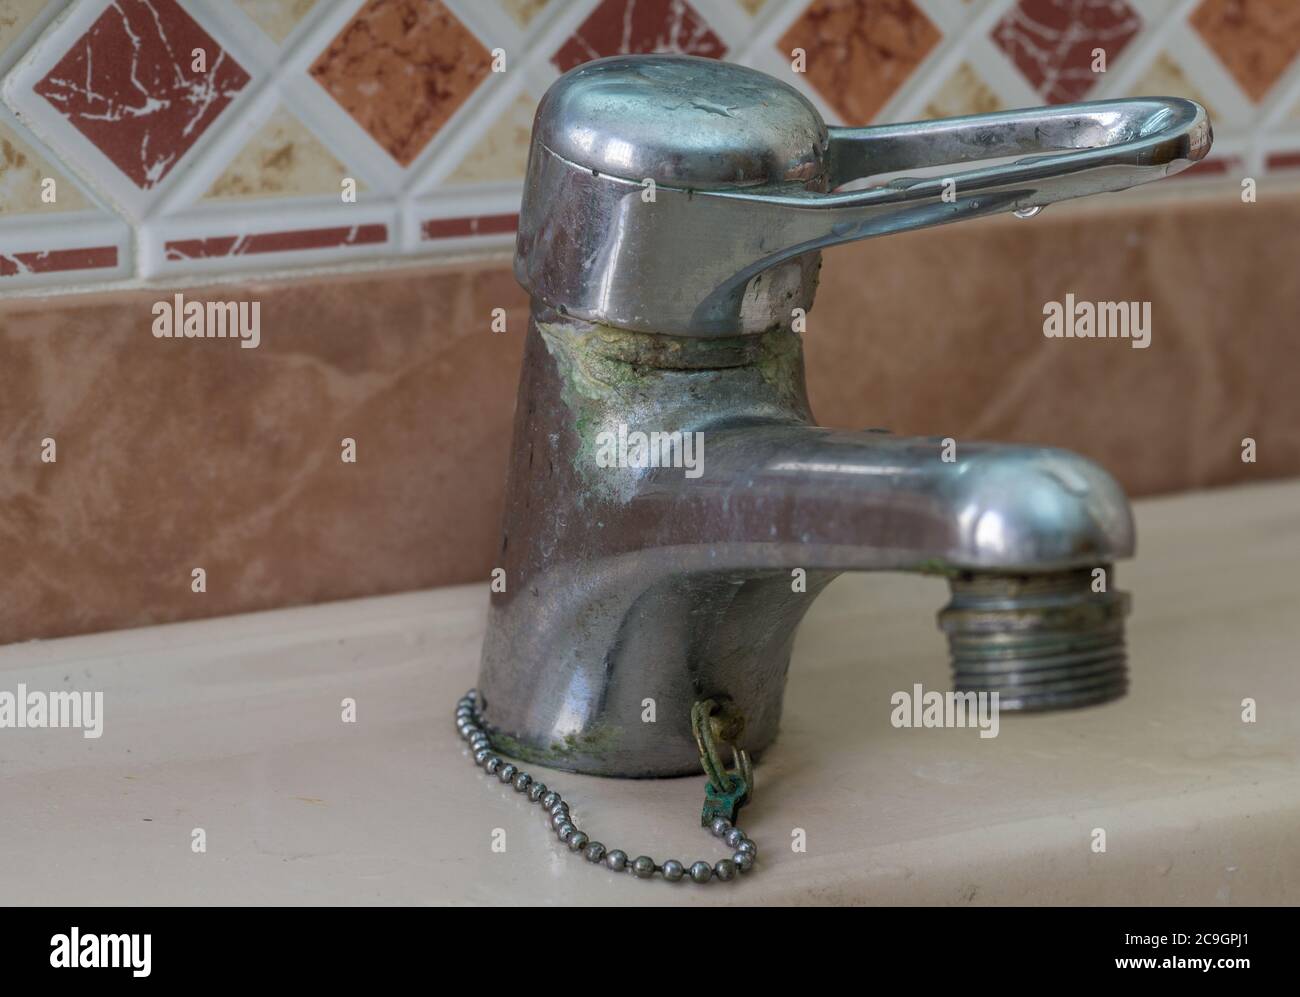 Water tap with limescale Calcium deposits on faucet Stock Photo